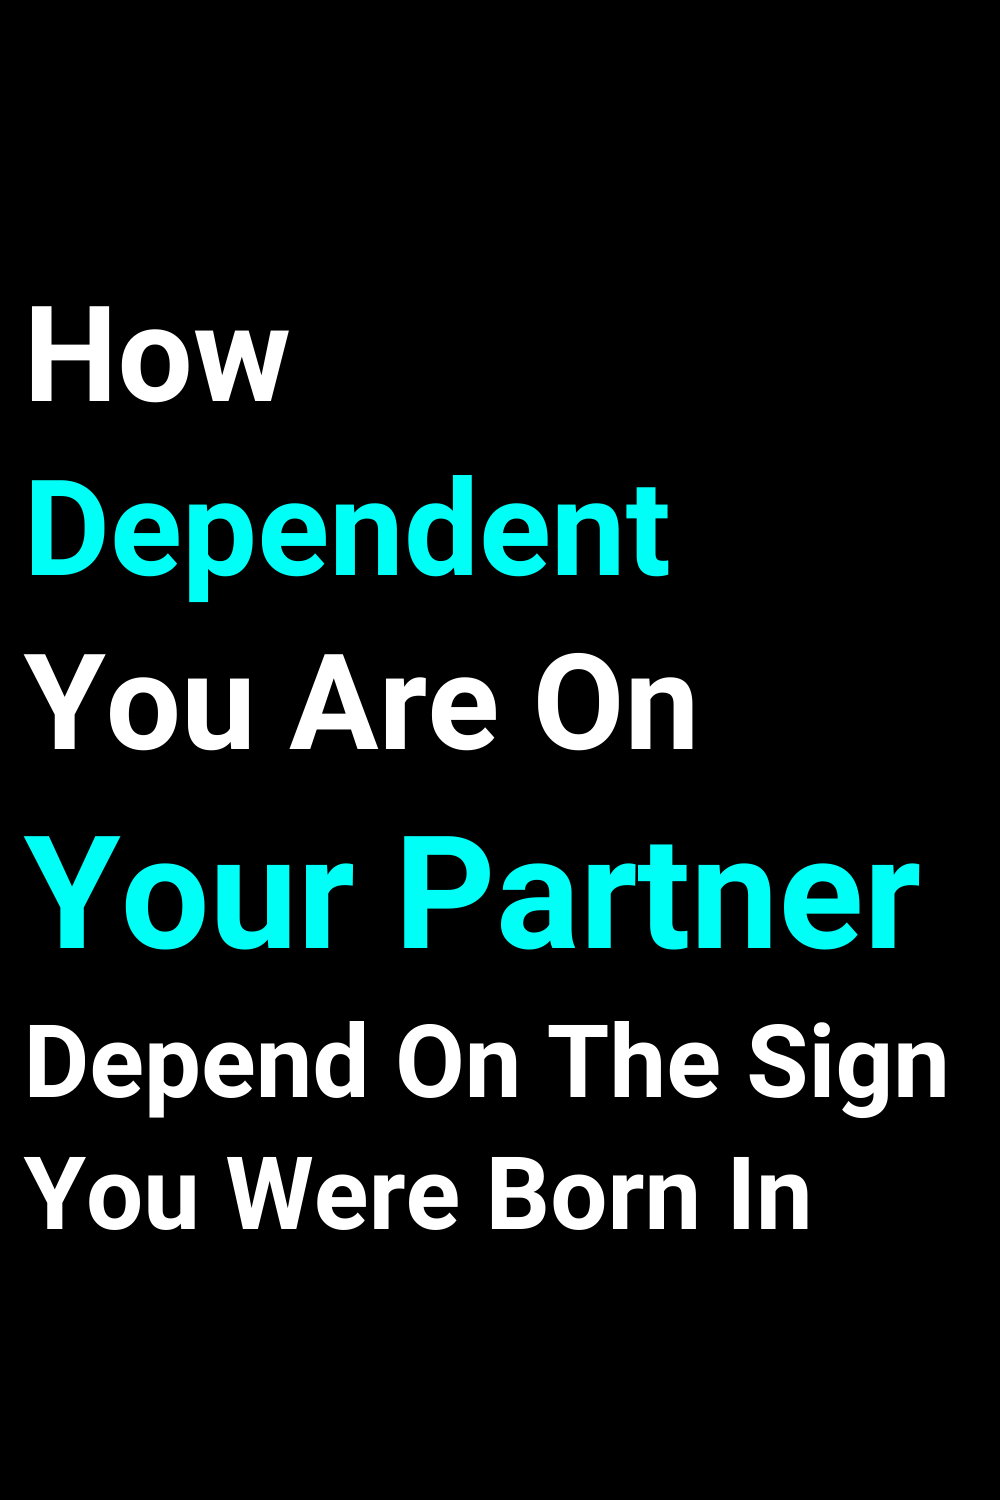 How Dependent You Are On Your Partner, Depend On The Sign You Were Born In